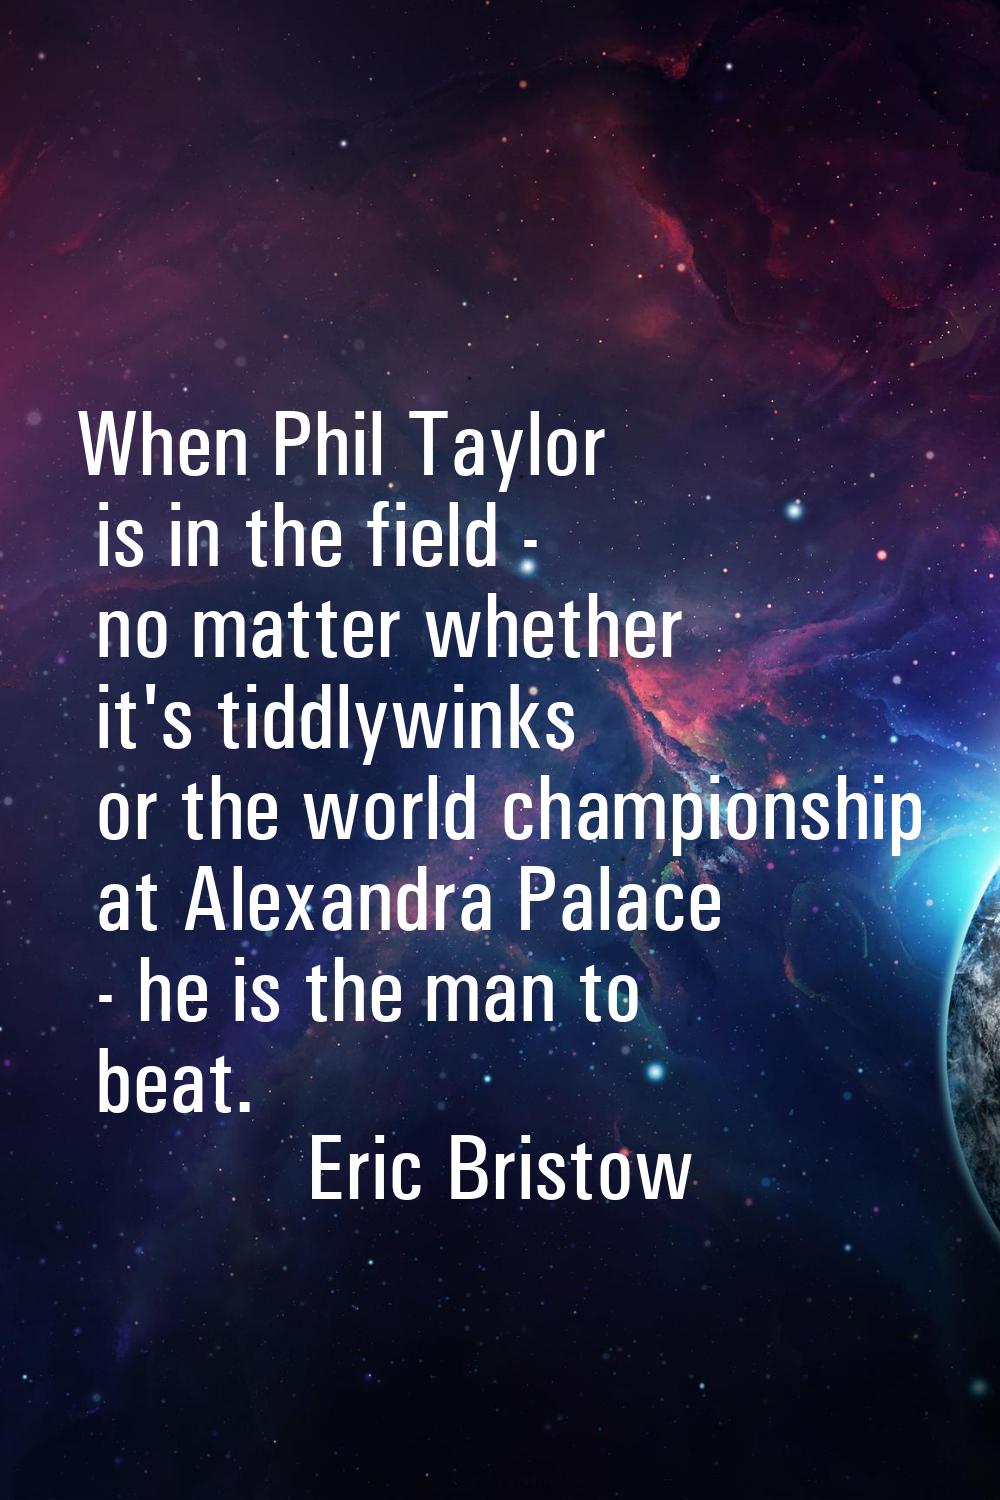 When Phil Taylor is in the field - no matter whether it's tiddlywinks or the world championship at 